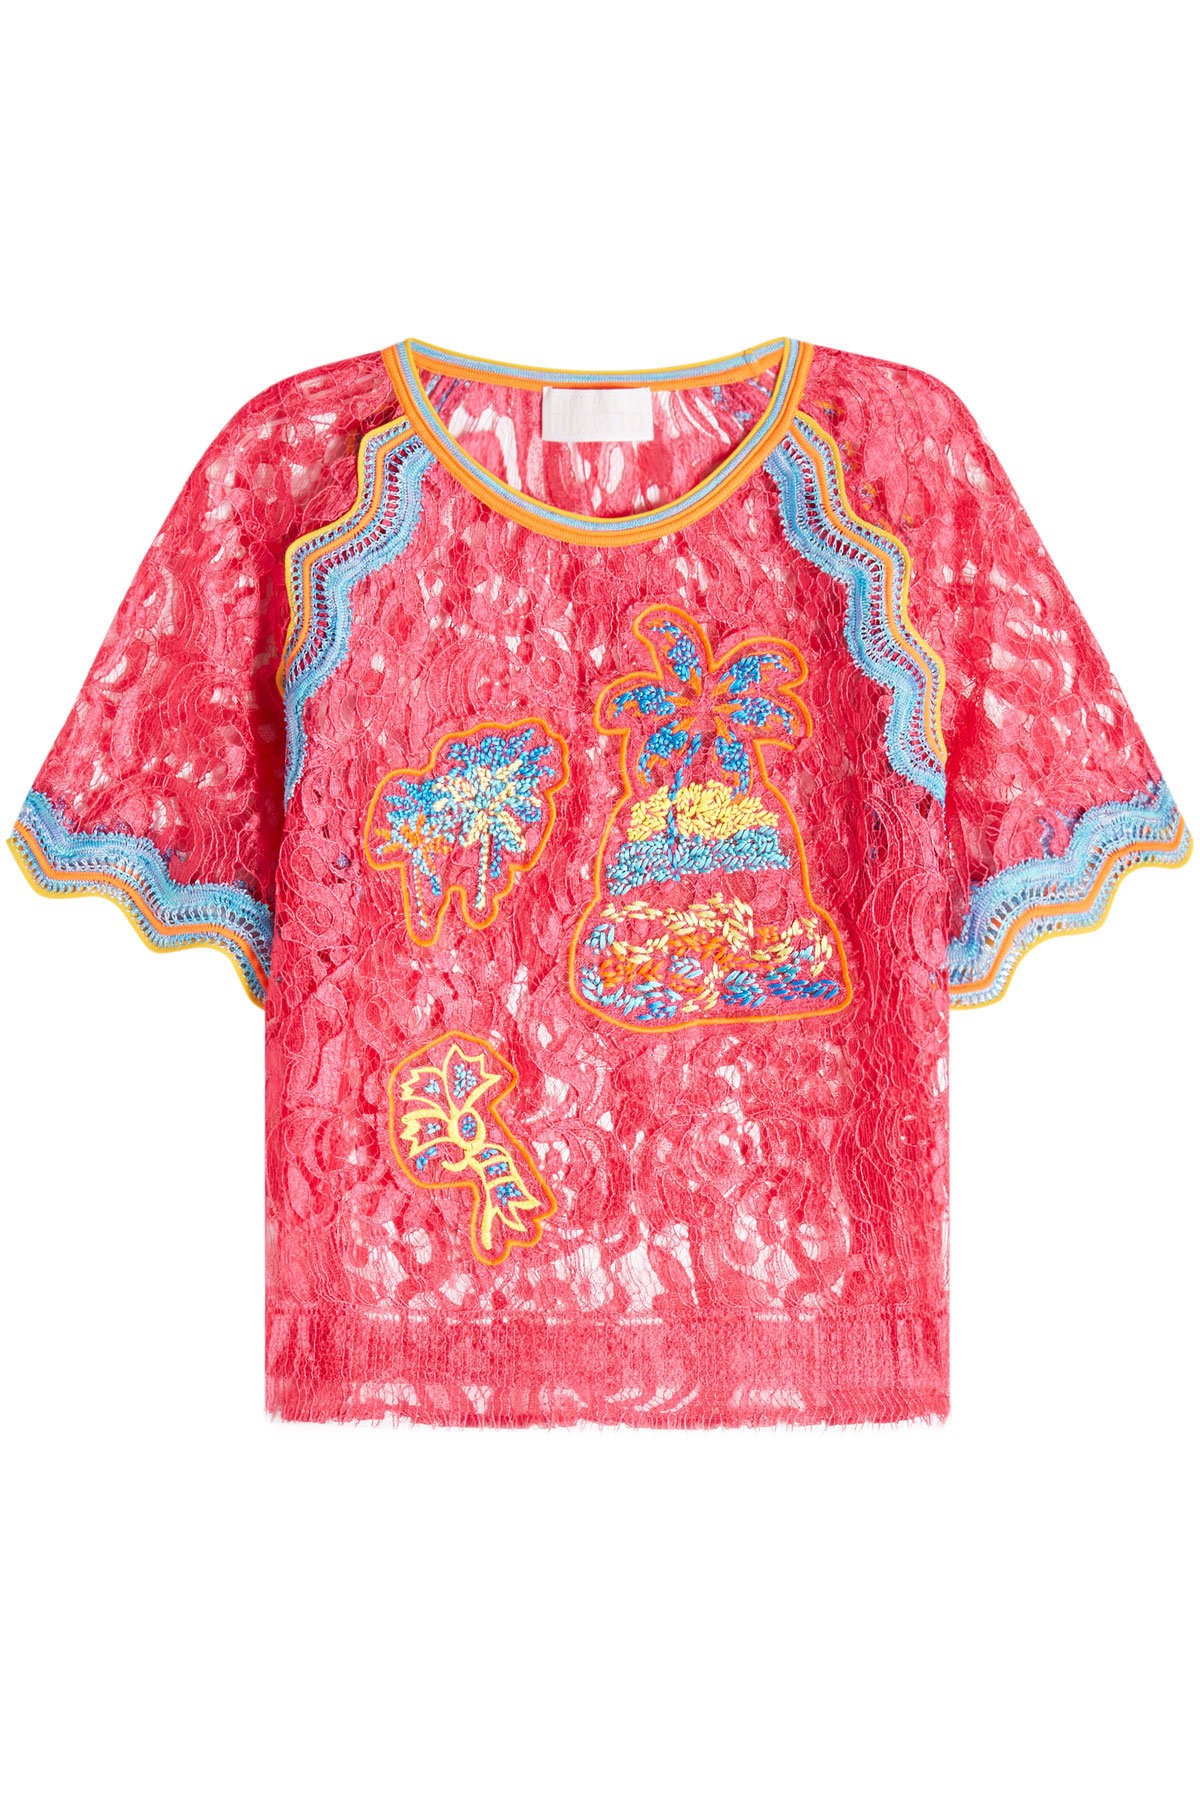 Peter Pilotto - Embroidered Lace Top